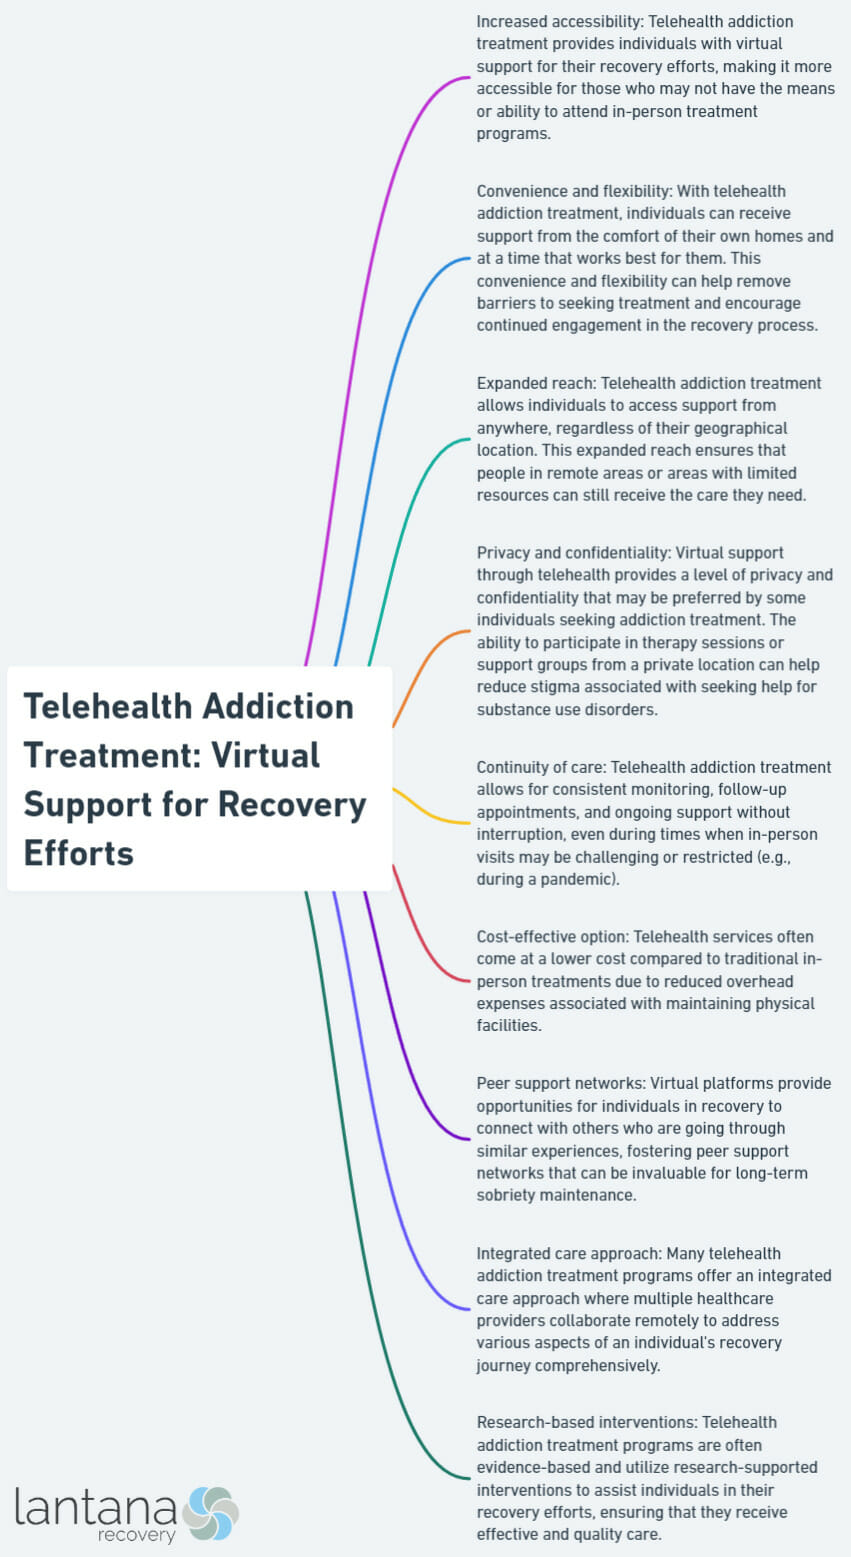 Telehealth Addiction Treatment: Virtual Support for Recovery Efforts